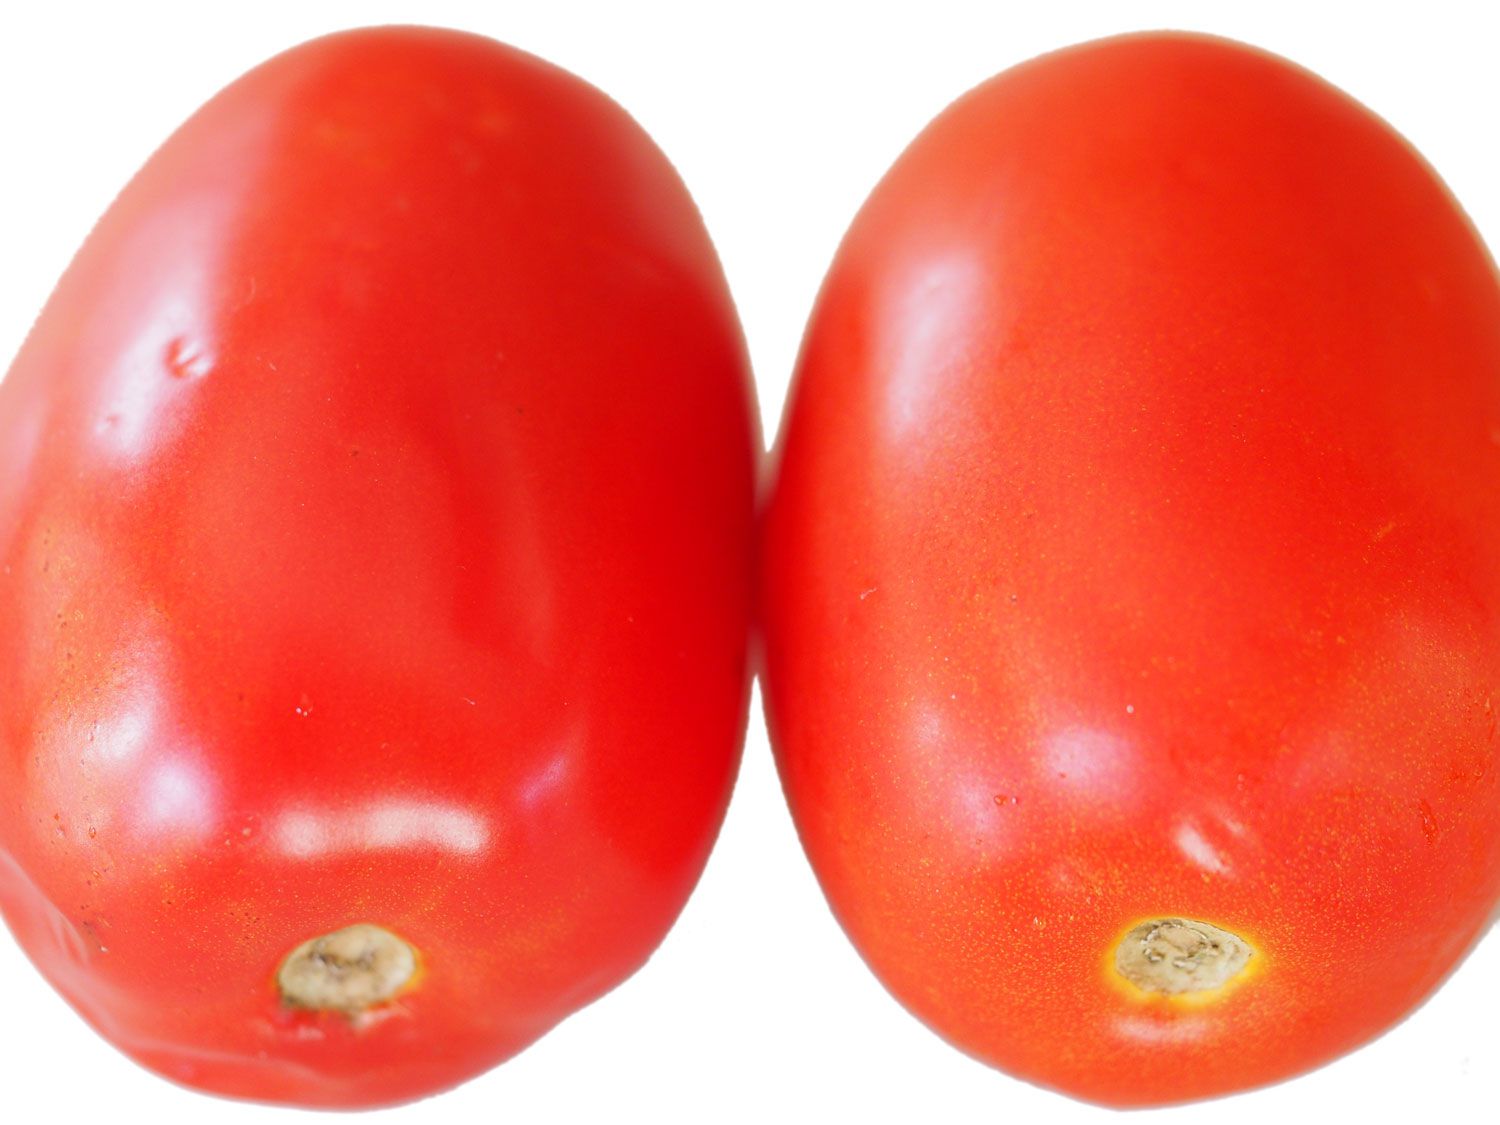 Overhead of two plum tomatoes resting next to each other on a white surface.